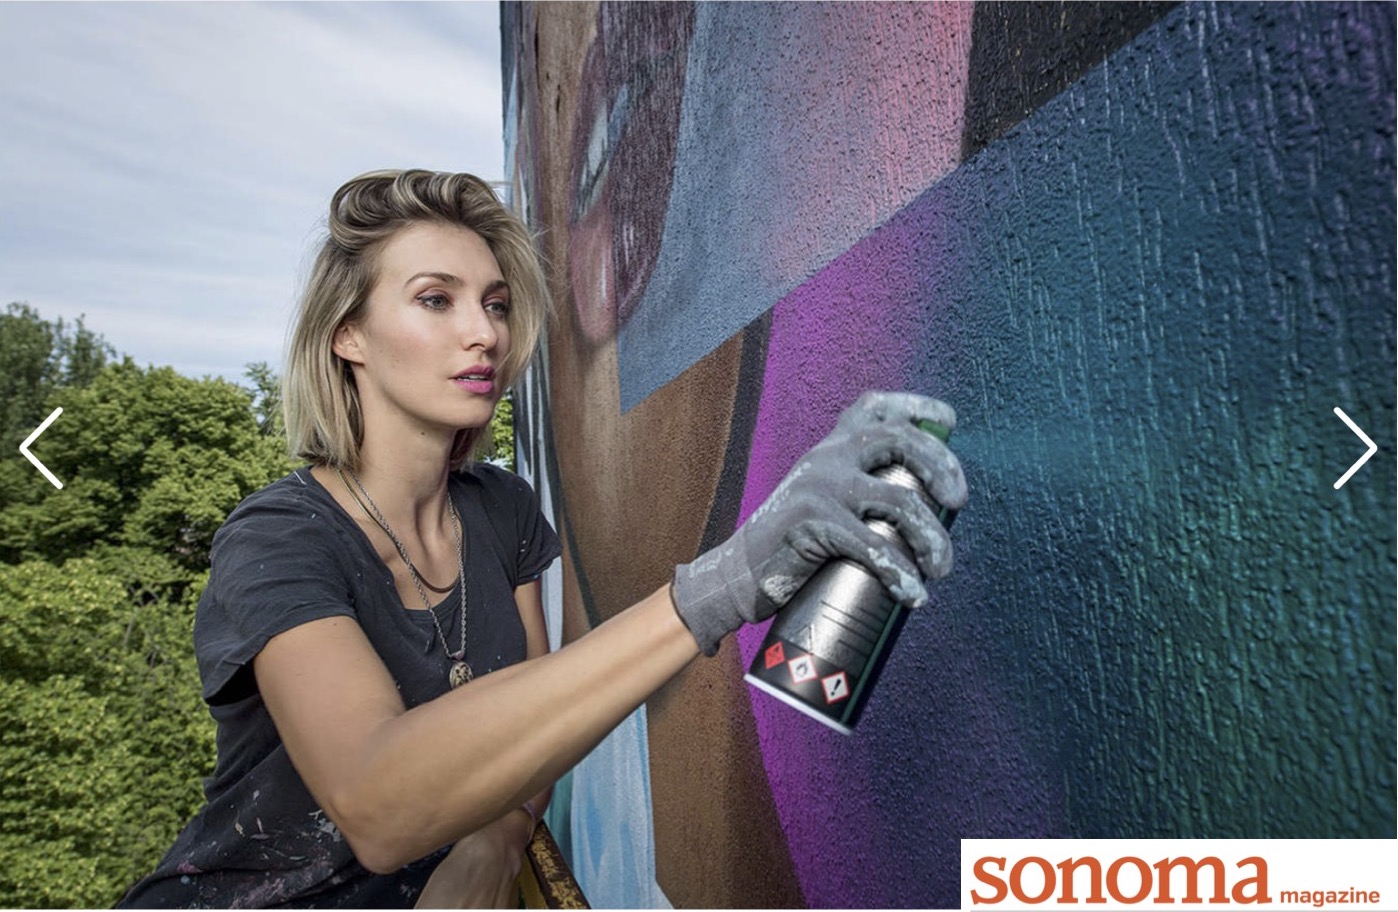 ONE OF THE WORLD’S MOST NOTABLE GRAFFITI ARTISTS LEAVES HER MARK ON NAPA VALLEY TRAIN CAR